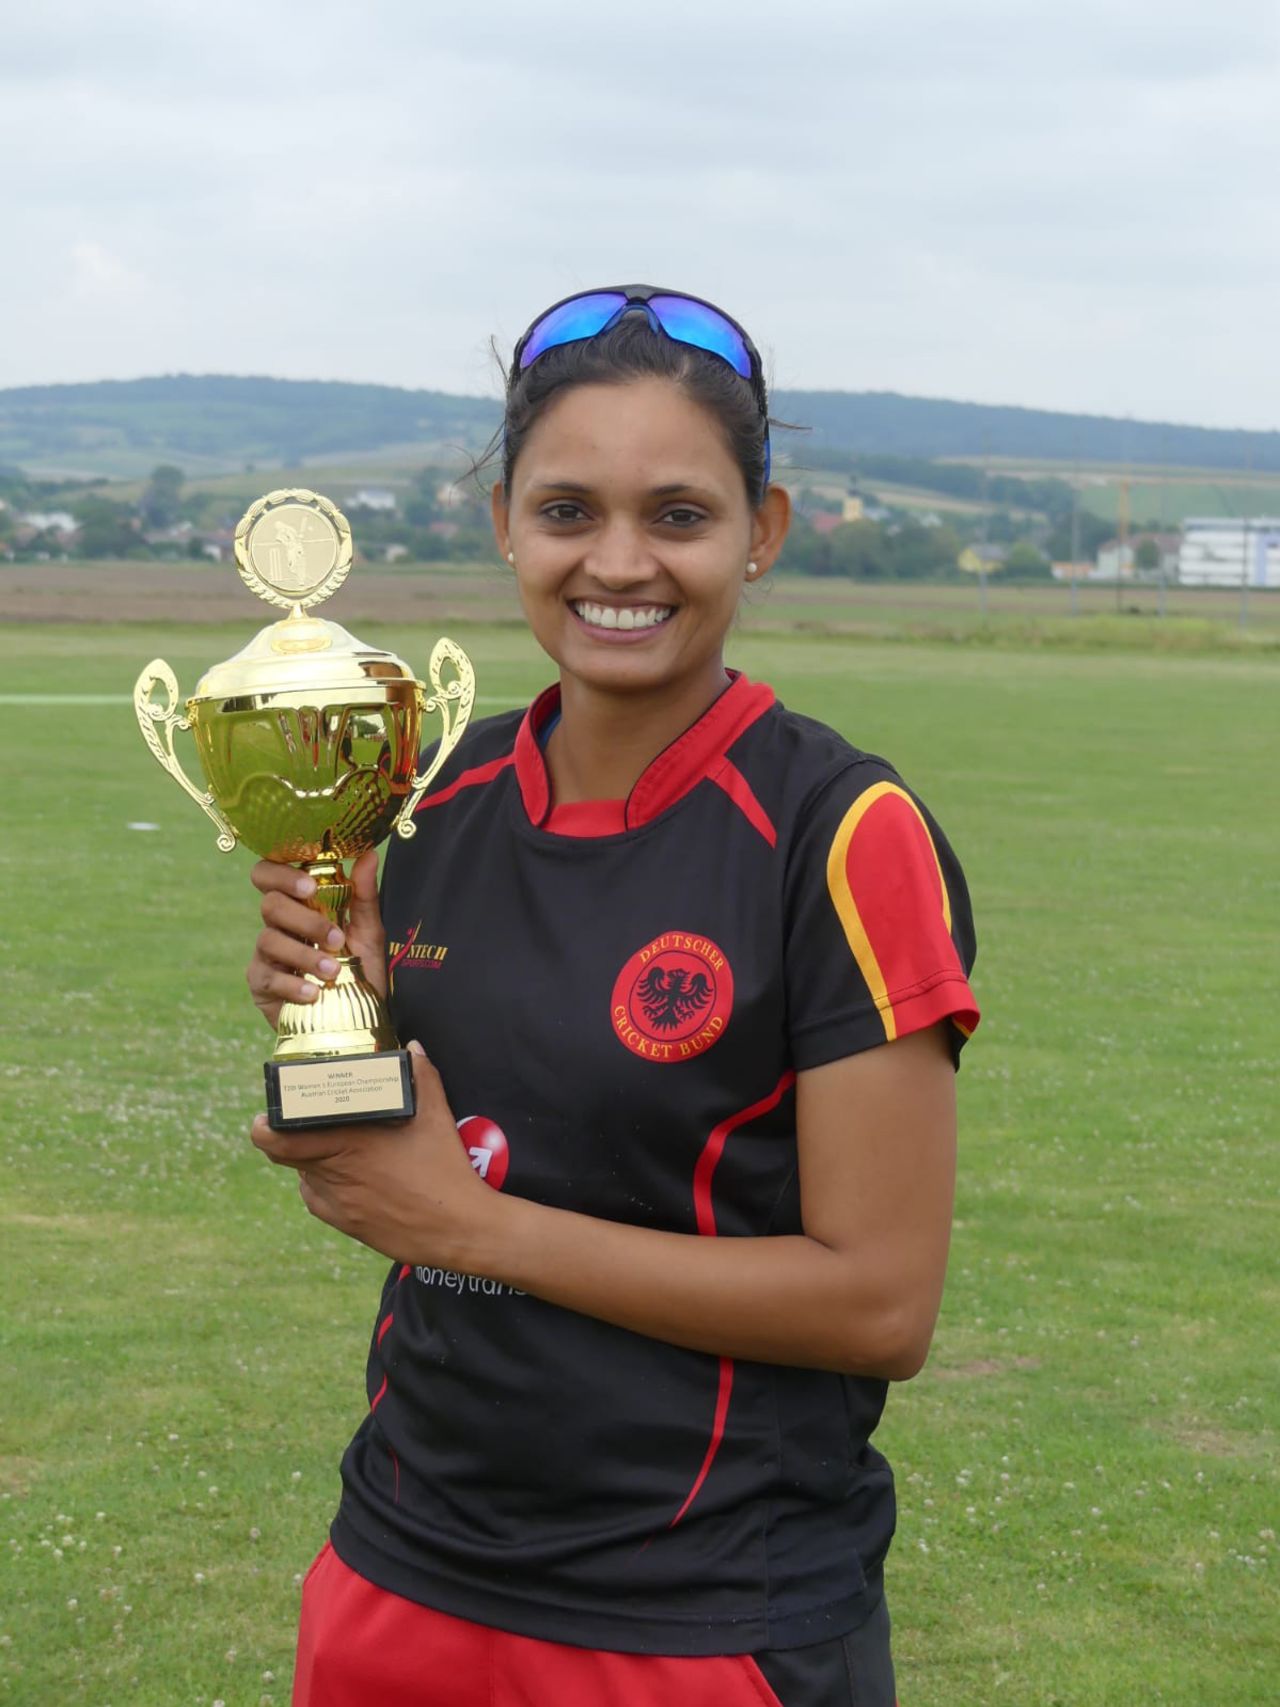 Anuradha Doddaballapur poses with the trophy, Austria v Germany, fifth T20I, Lower Austria, August 15, 2020